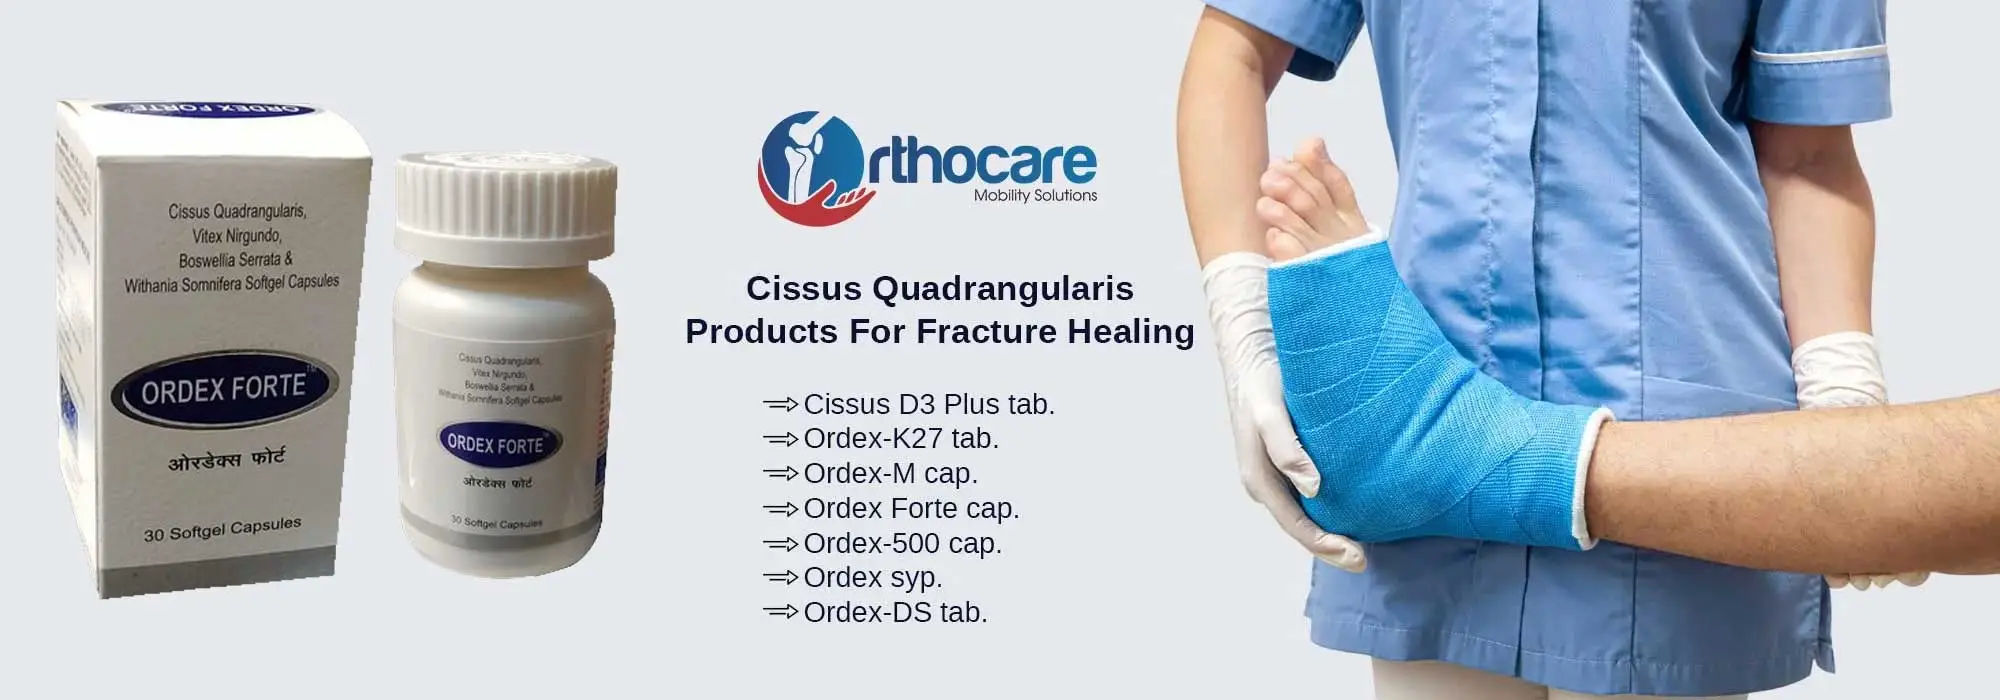 Cissus Quadrangularis Products For Fracture Healing Suppliers in Kamareddy